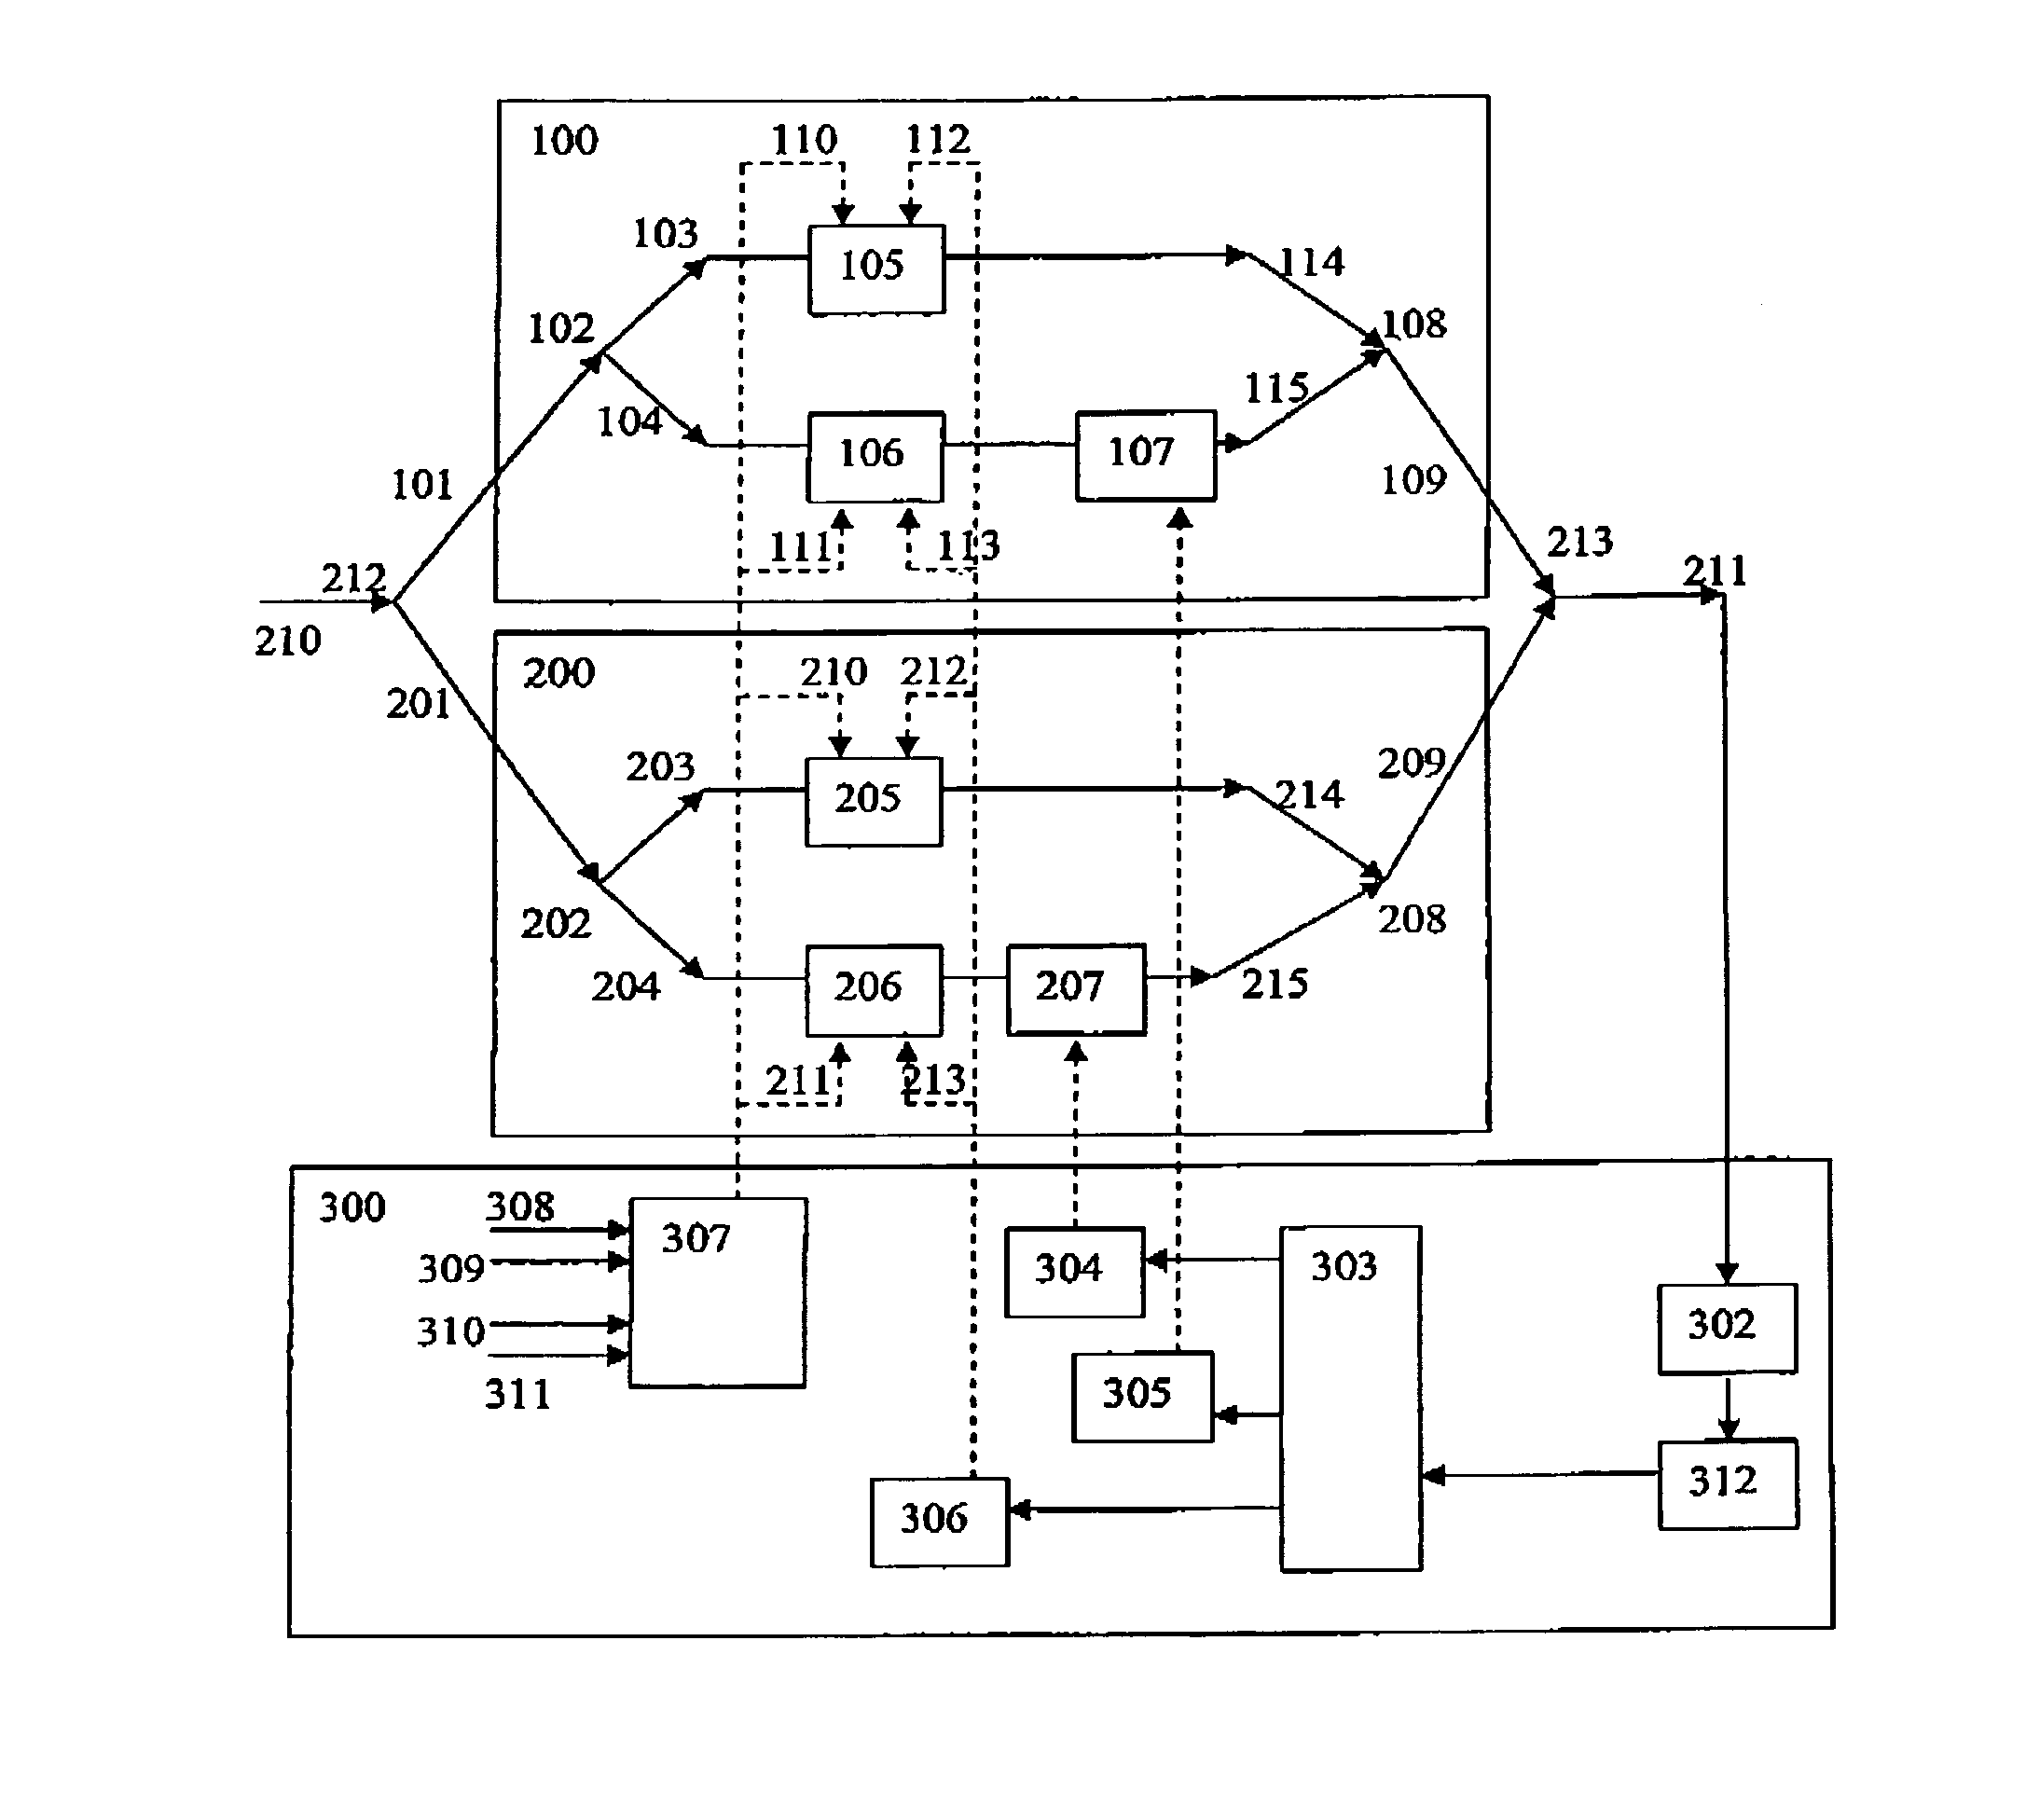 Electro-optical integrated transmitter chip for arbitrary quadrature modulation of optical signals